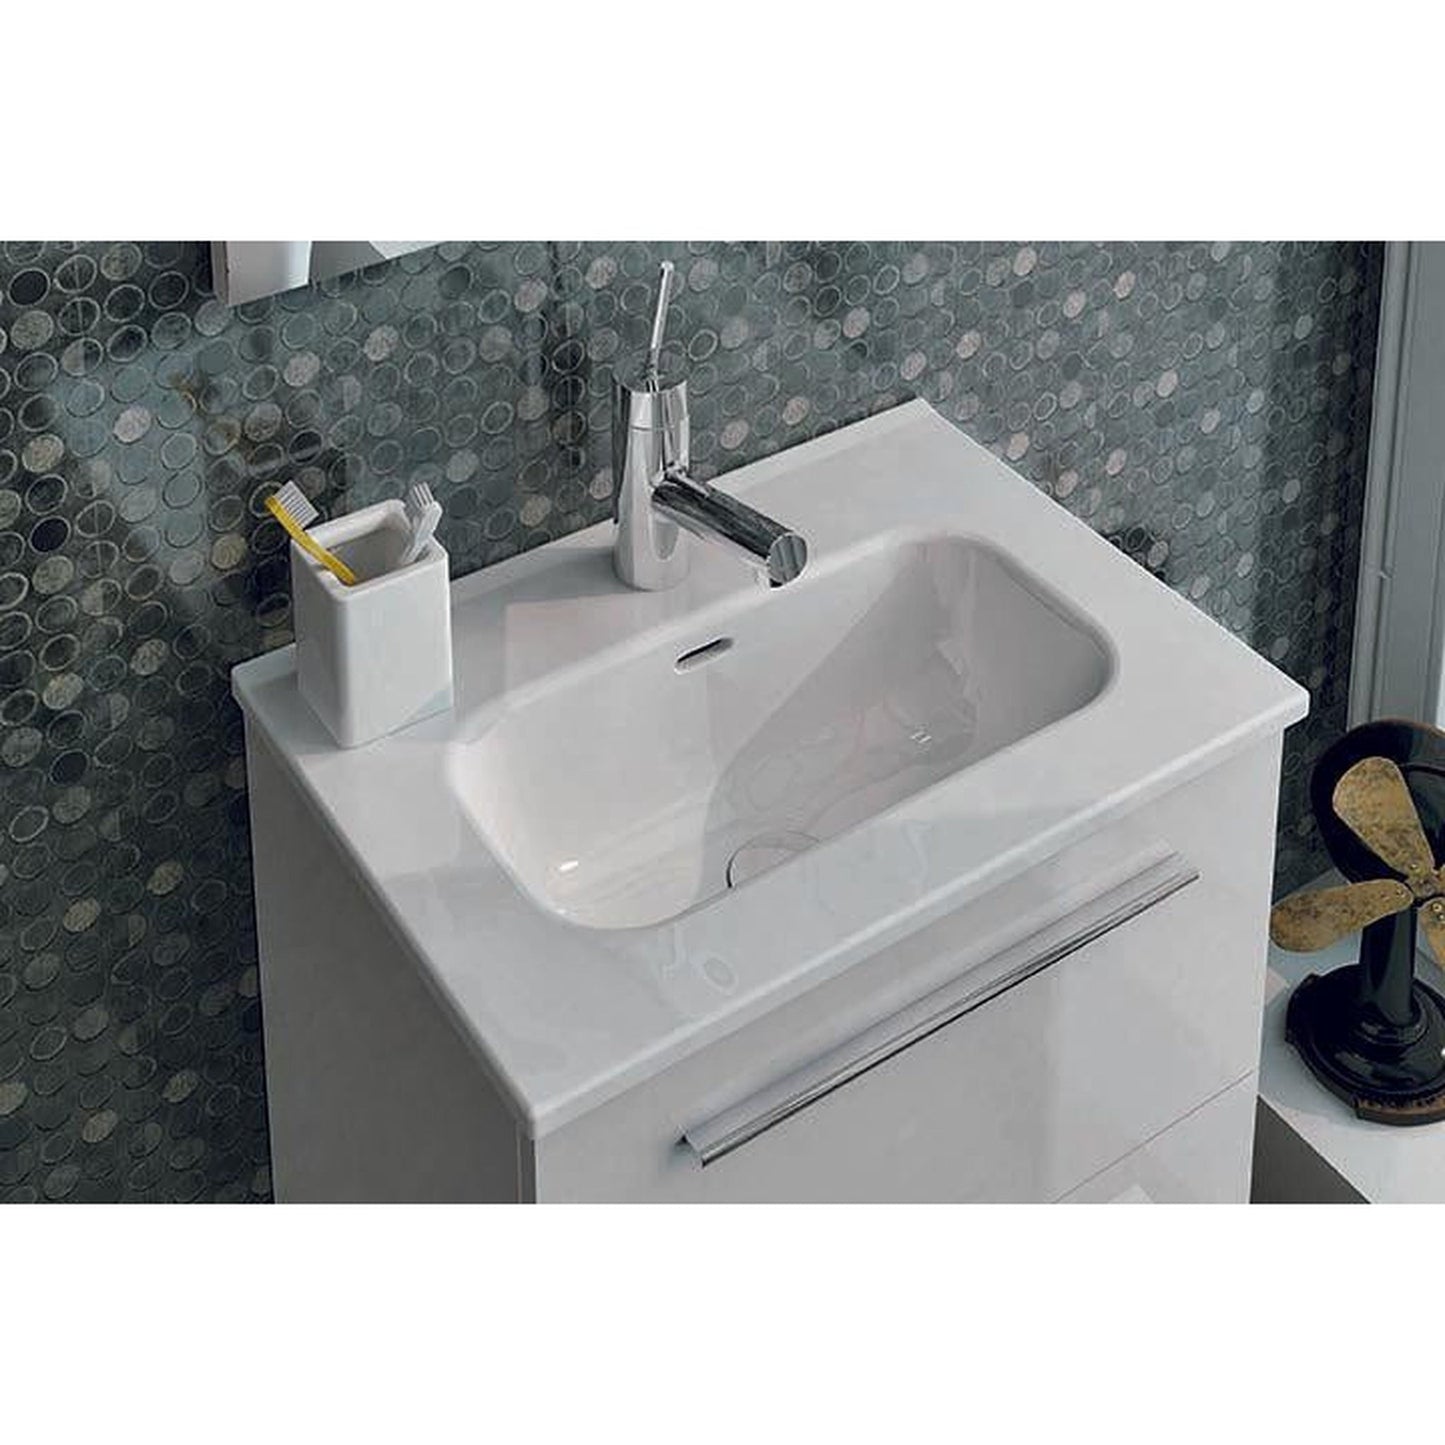 Royo Street 20" x 14" White Modern Wall-mounted Vanity Set With 2 Drawers Sink and Mirror